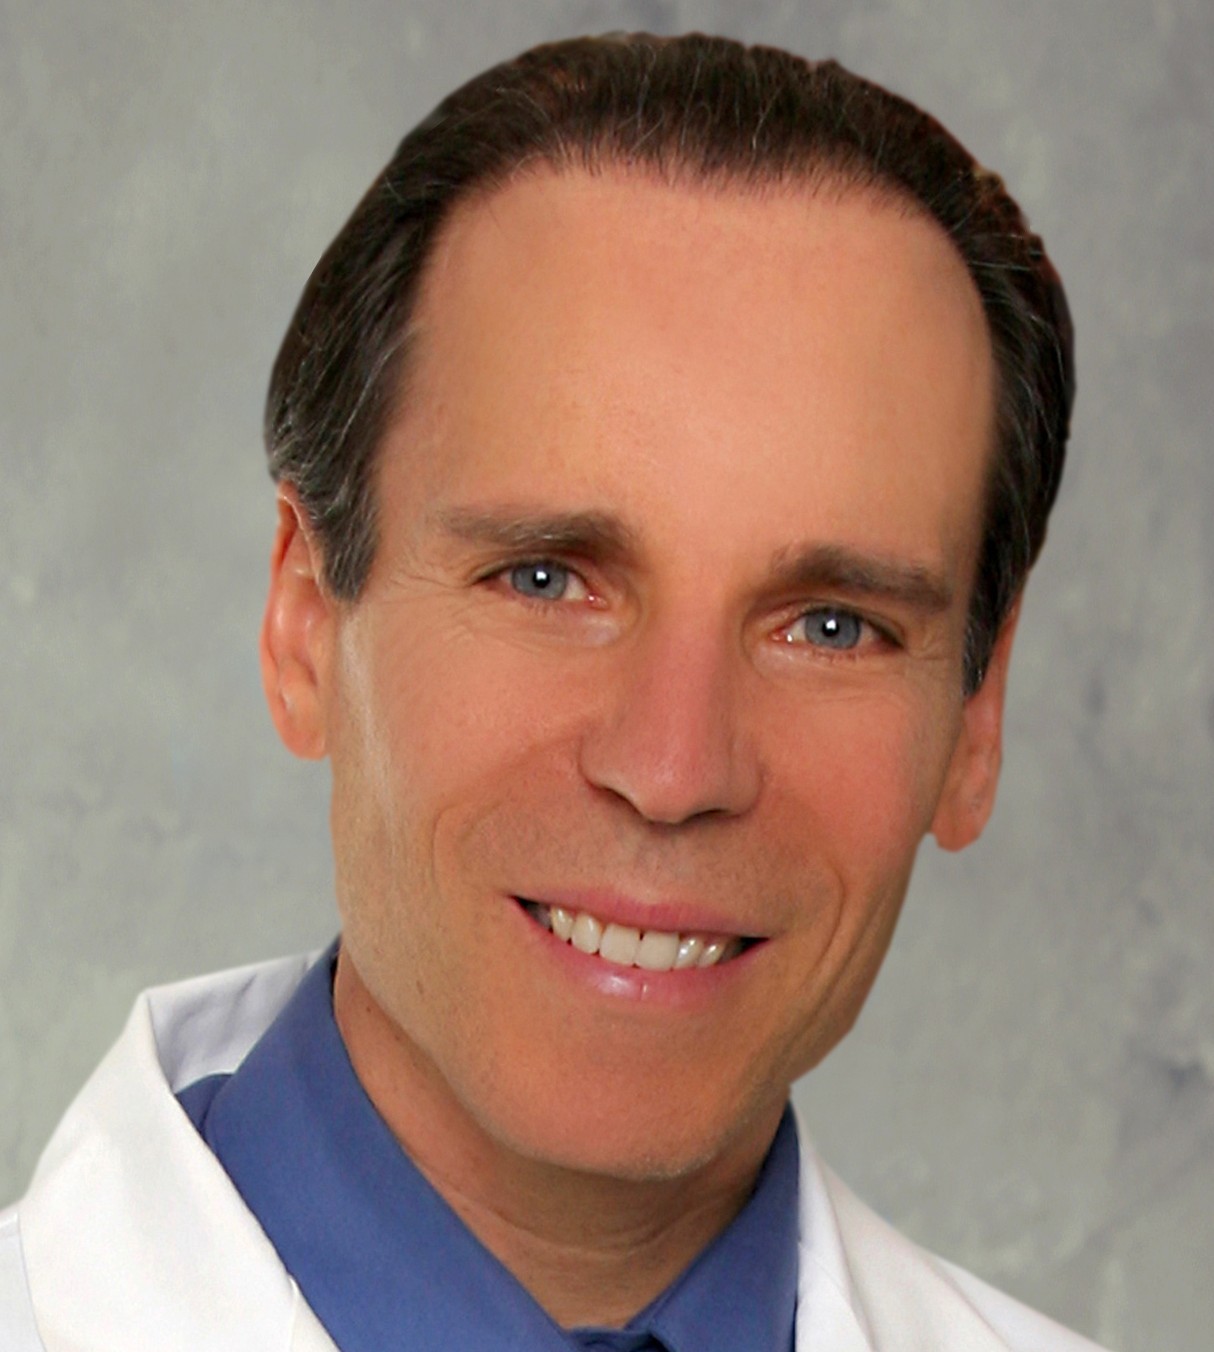 Dr. Fuhrman’s Tips for Healthy Eating with a Nutritarian Plant-Based Diet